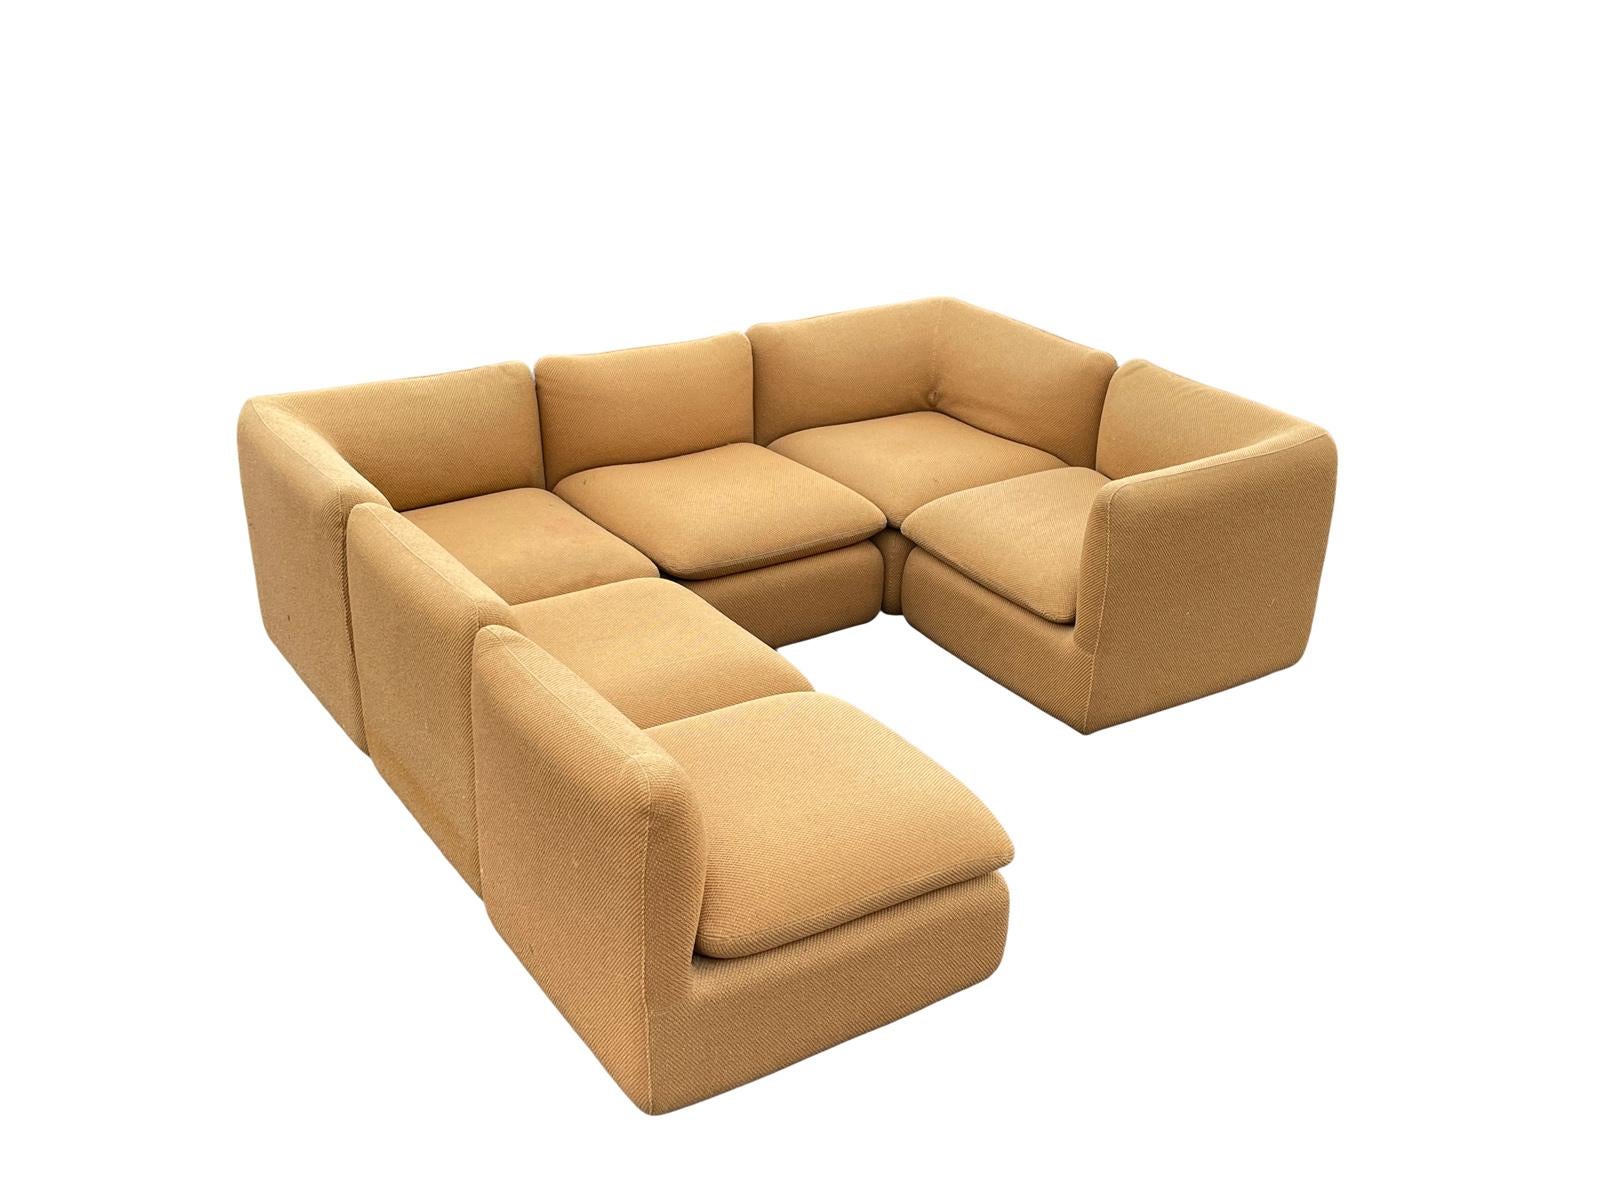 Late 20th Century 1980s Modular Ganging ELYSÉE Sofa Unit Sectional by Steelcase  For Sale